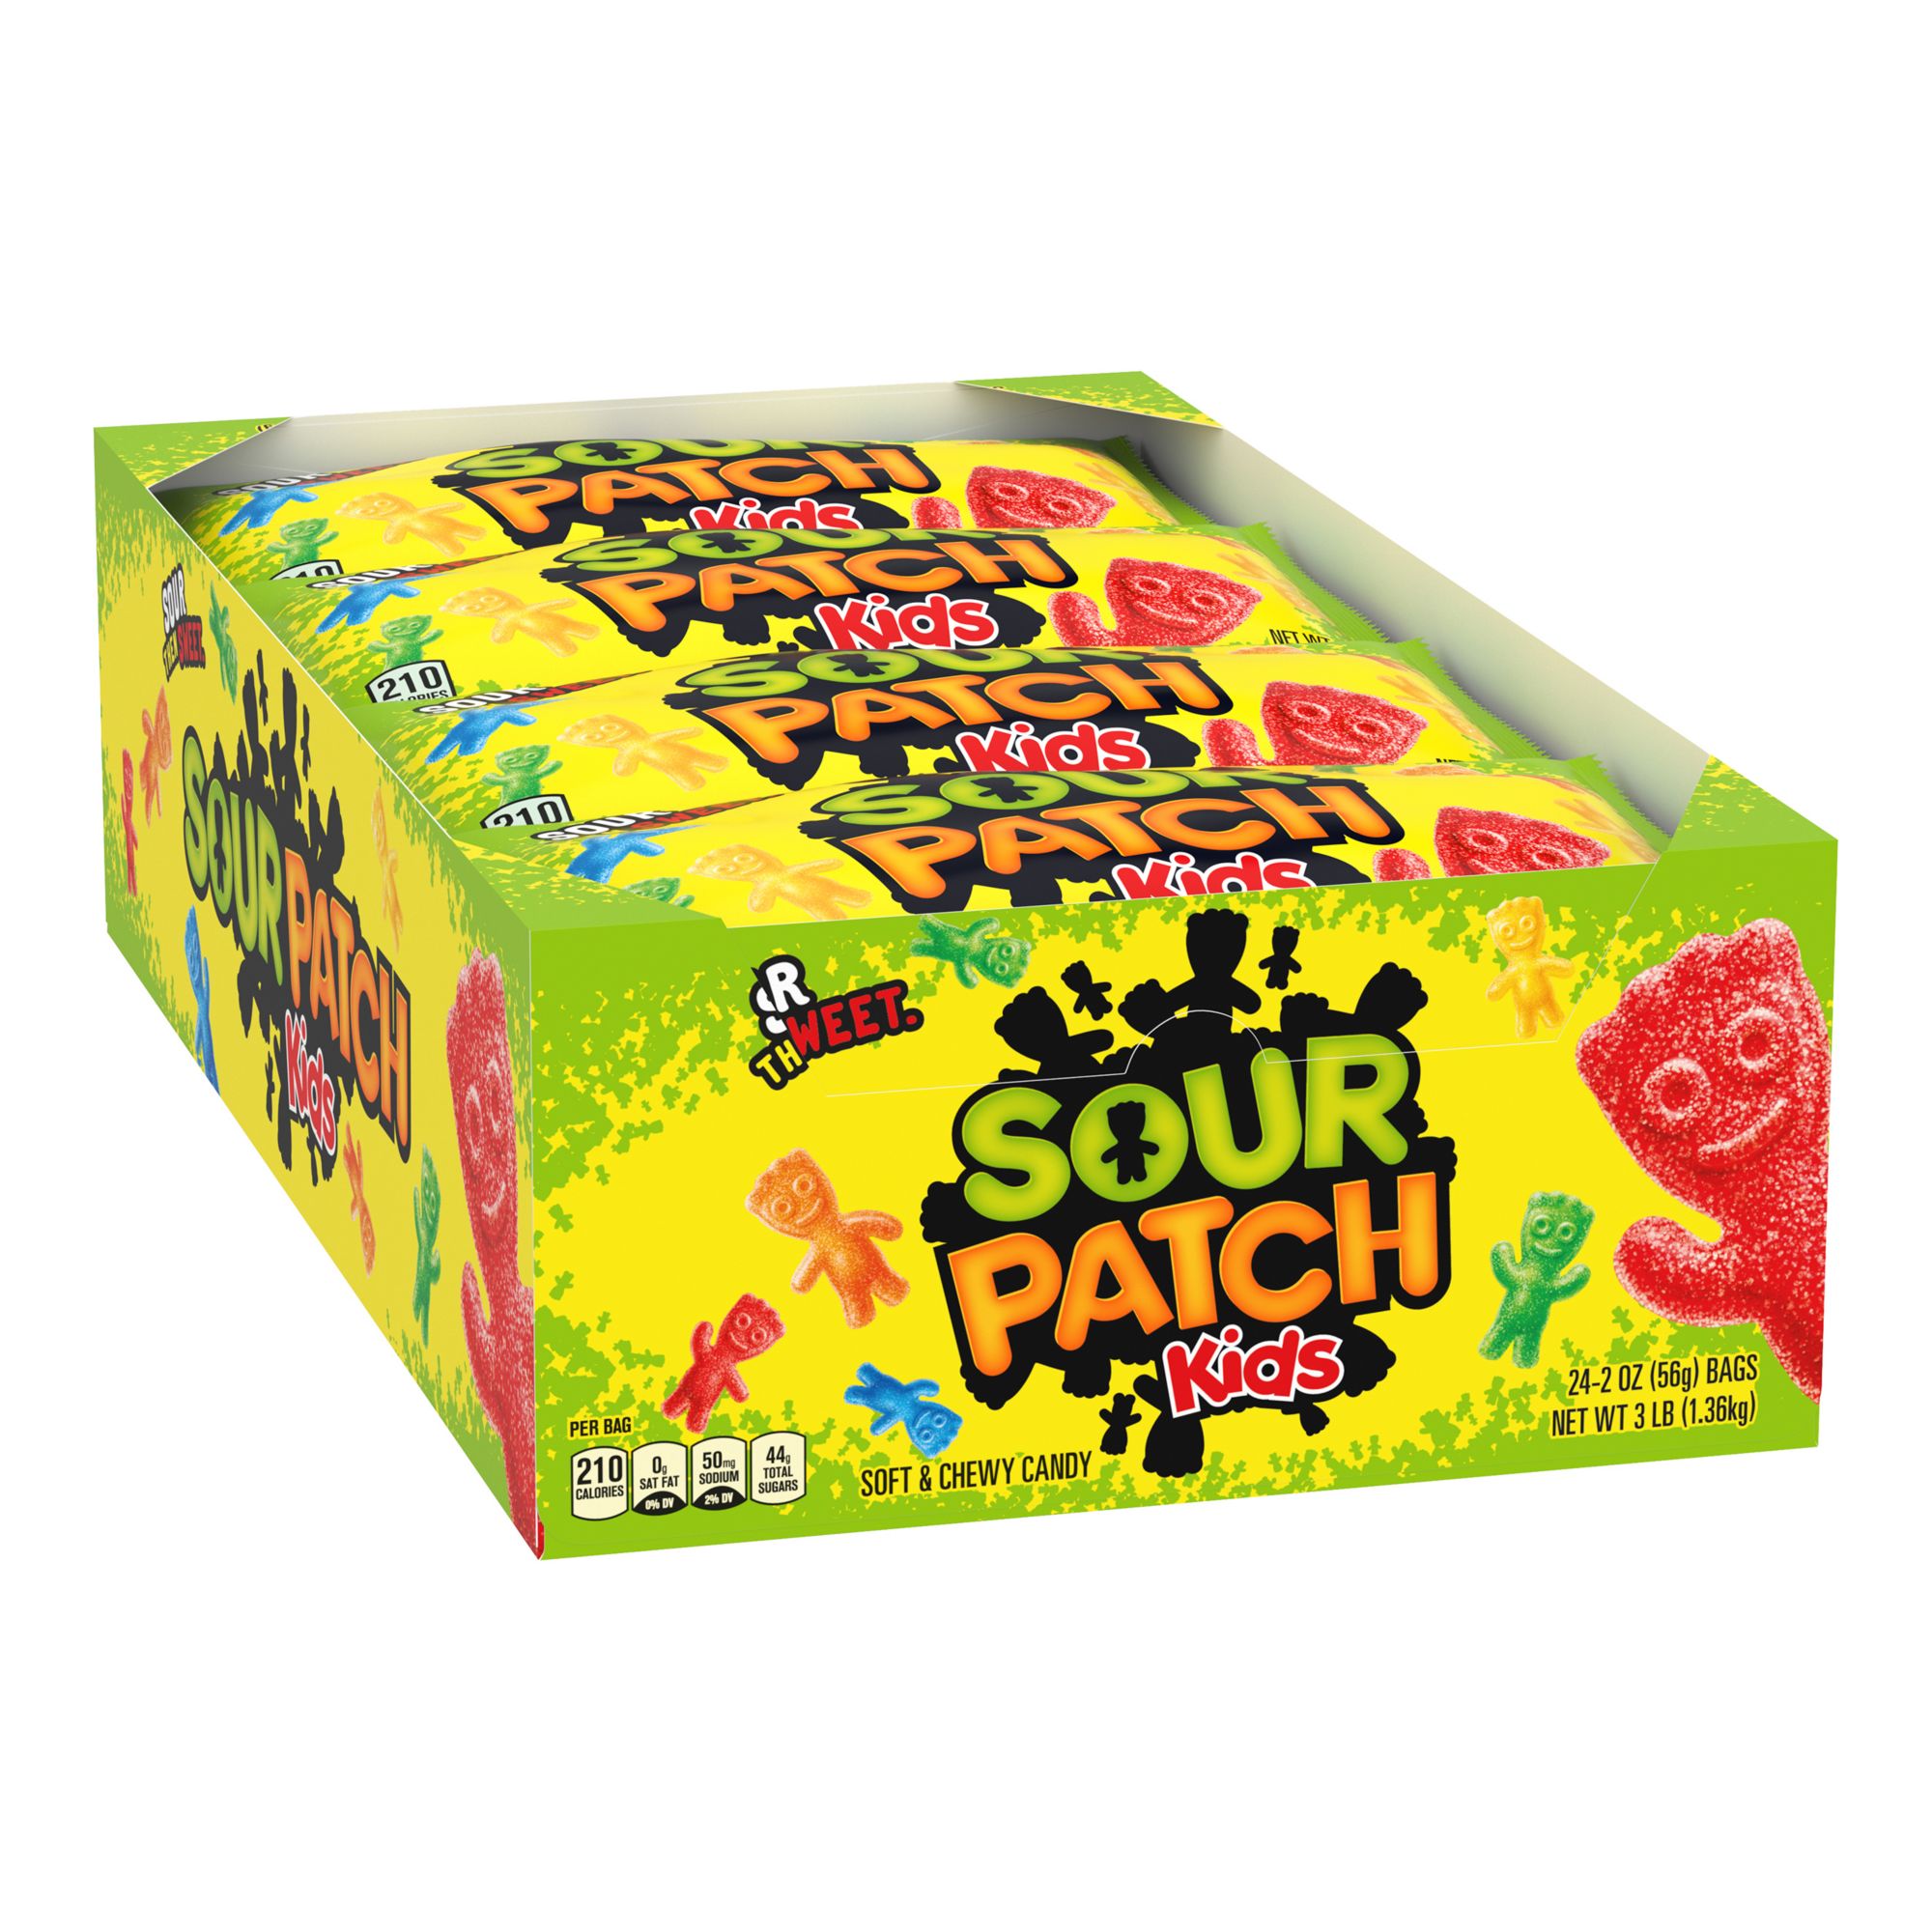 Sour Patch Kids & Swedish Fish Variety Pack, 24 ct.